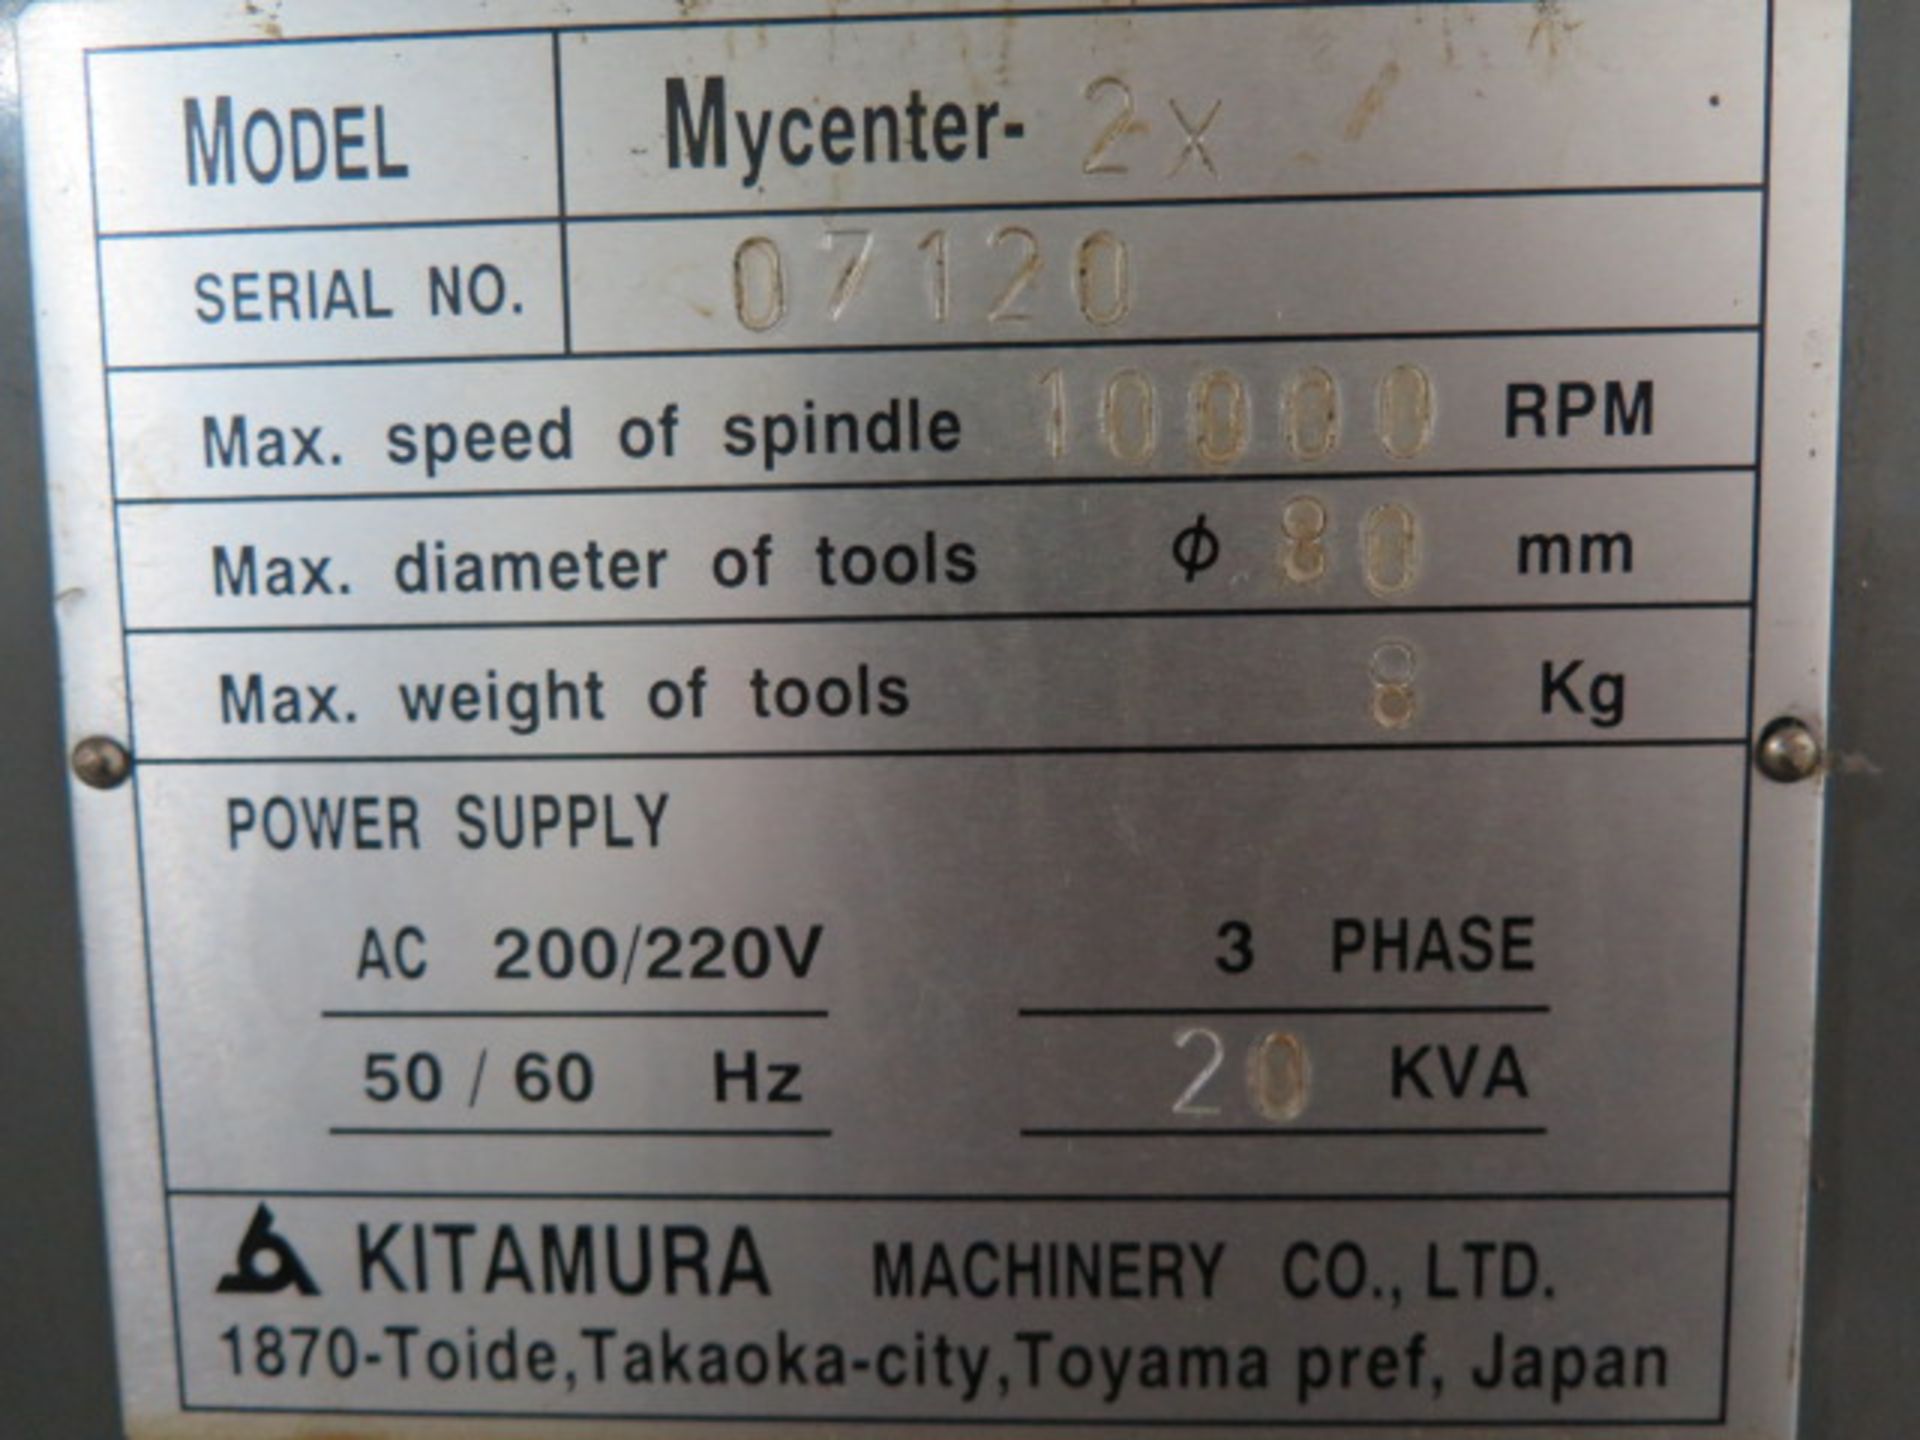 1998 Kitamura Mycenter-2X CNC VMC s/n 07120 w/ Yasnac i80 Controls, 20-Station, SOLD AS IS - Image 23 of 23